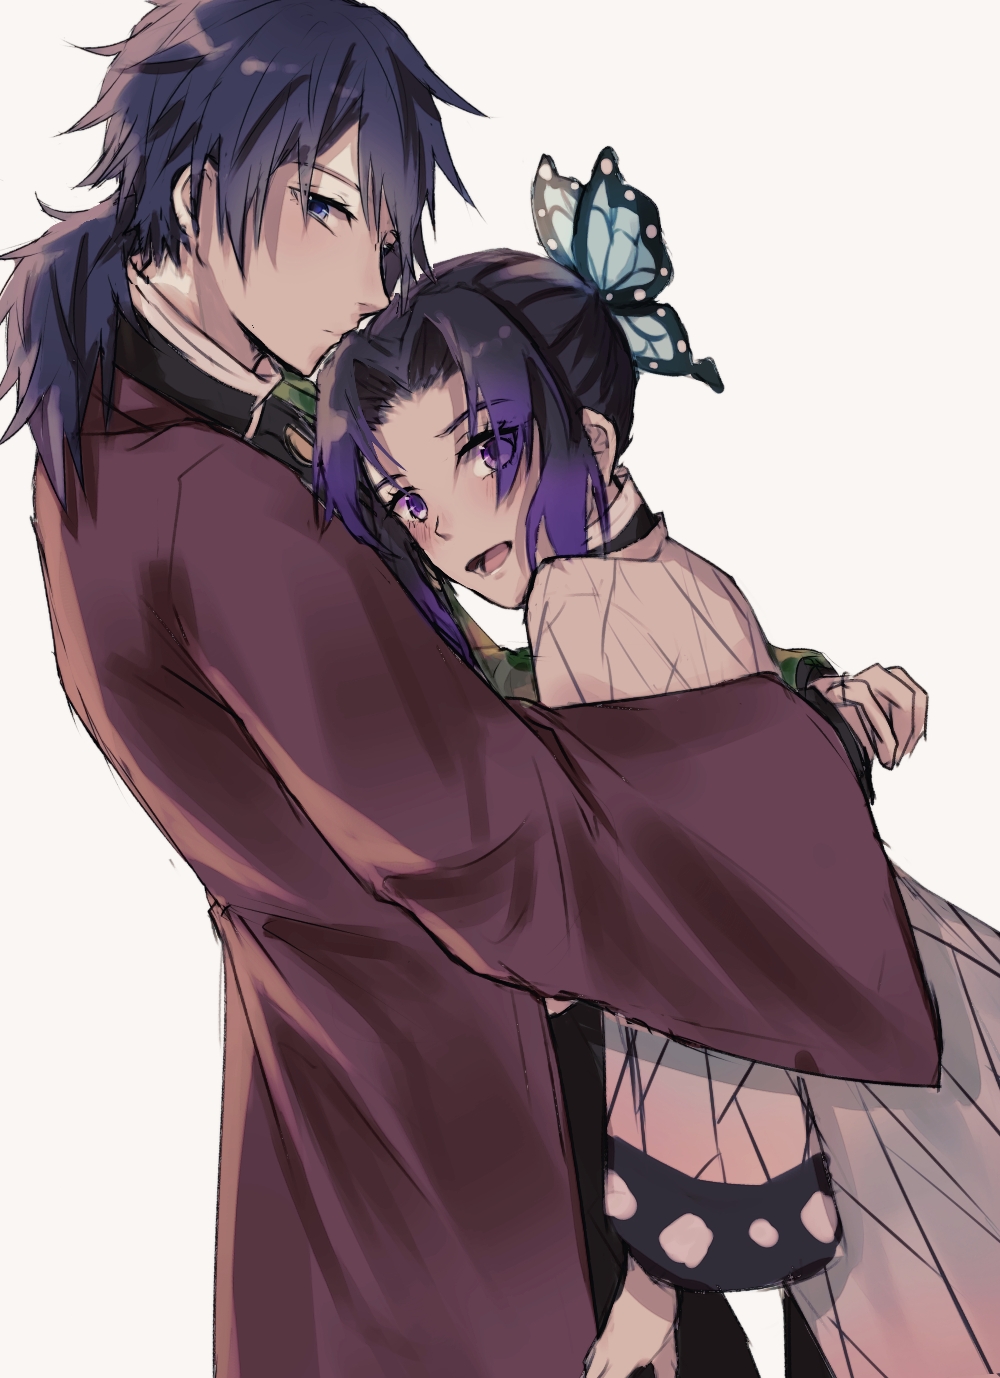 1boy 1girl bangs black_hair blue_eyes blush breasts butterfly_hair_ornament buttons closed_mouth colored_tips commentary_request dark_blue_hair demon_slayer_uniform eyelashes flustered hair_ornament haori highres hug jacket japanese_clothes kimetsu_no_yaiba kochou_shinobu large_breasts looking_at_viewer low_ponytail multicolored_clothes multicolored_hair multicolored_jacket open_mouth patterned_clothing purple_hair simple_background standing tanuyama teeth tomioka_giyuu two-sided_fabric upper_teeth violet_eyes white_background wide_sleeves